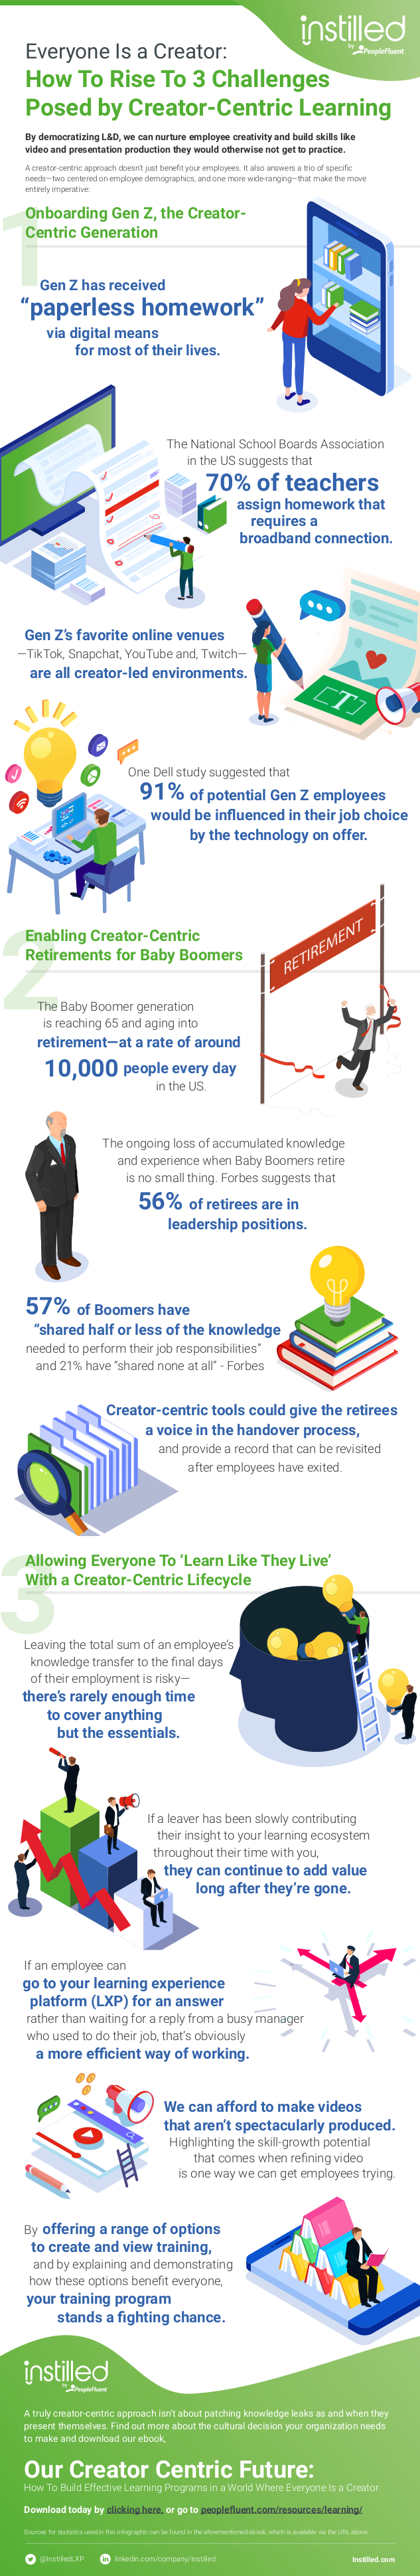 Everyone Is a Creator: How to Rise to 3 Challenges Posed by Creator-Centric Learning [Infographic]